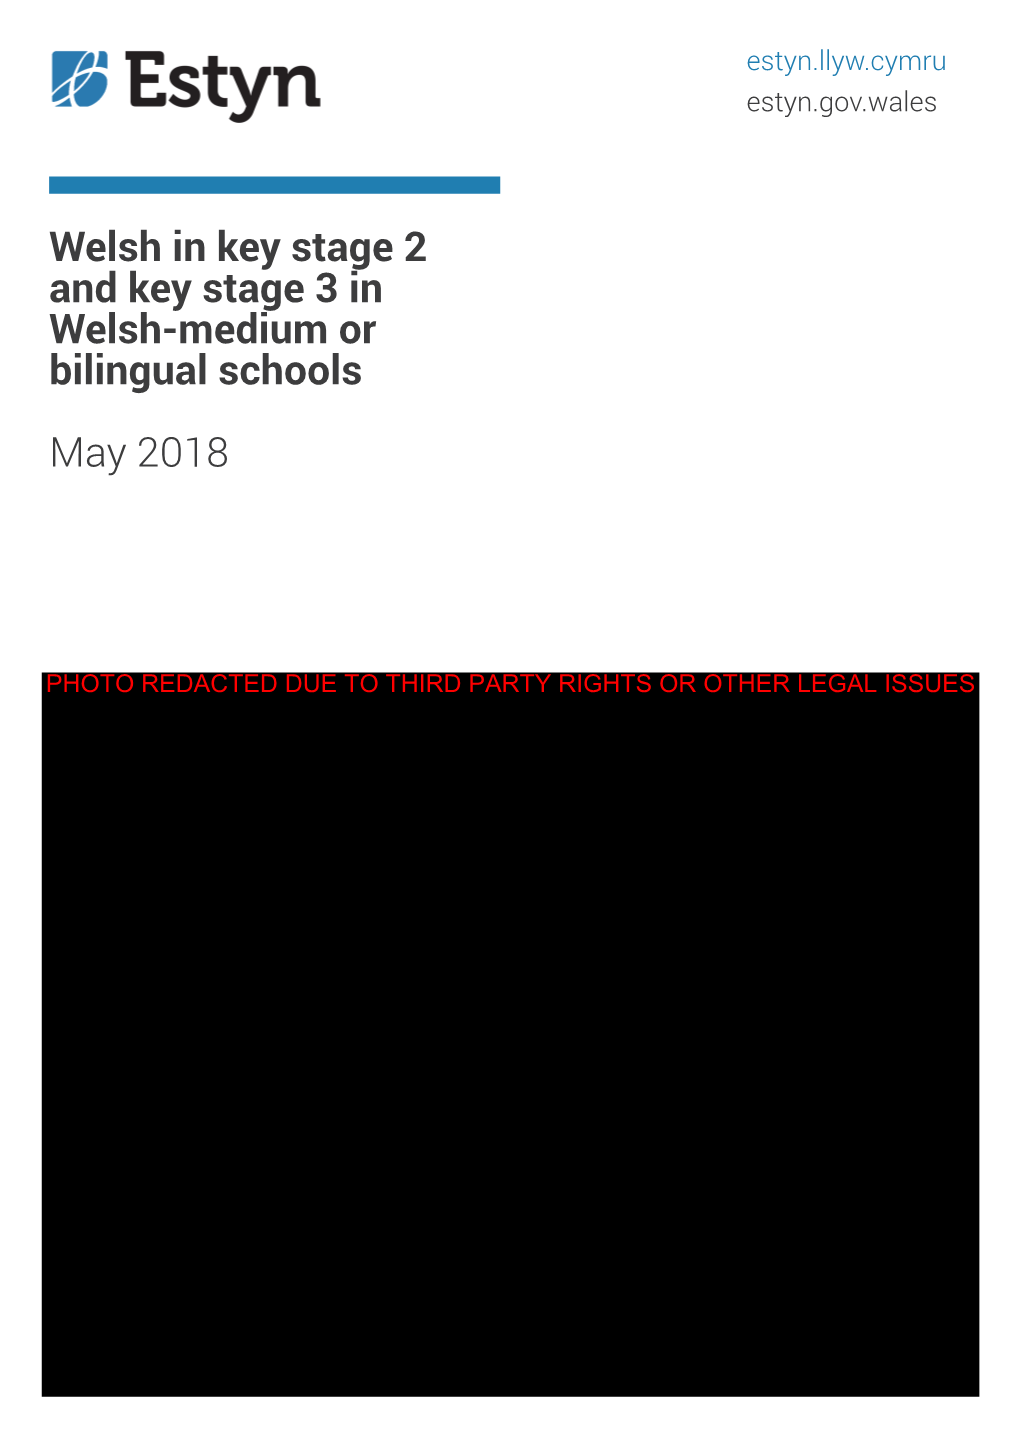 Welsh in Key Stage 2 and Key Stage 3 in Welsh-Medium Or Bilingual Schools May 2018